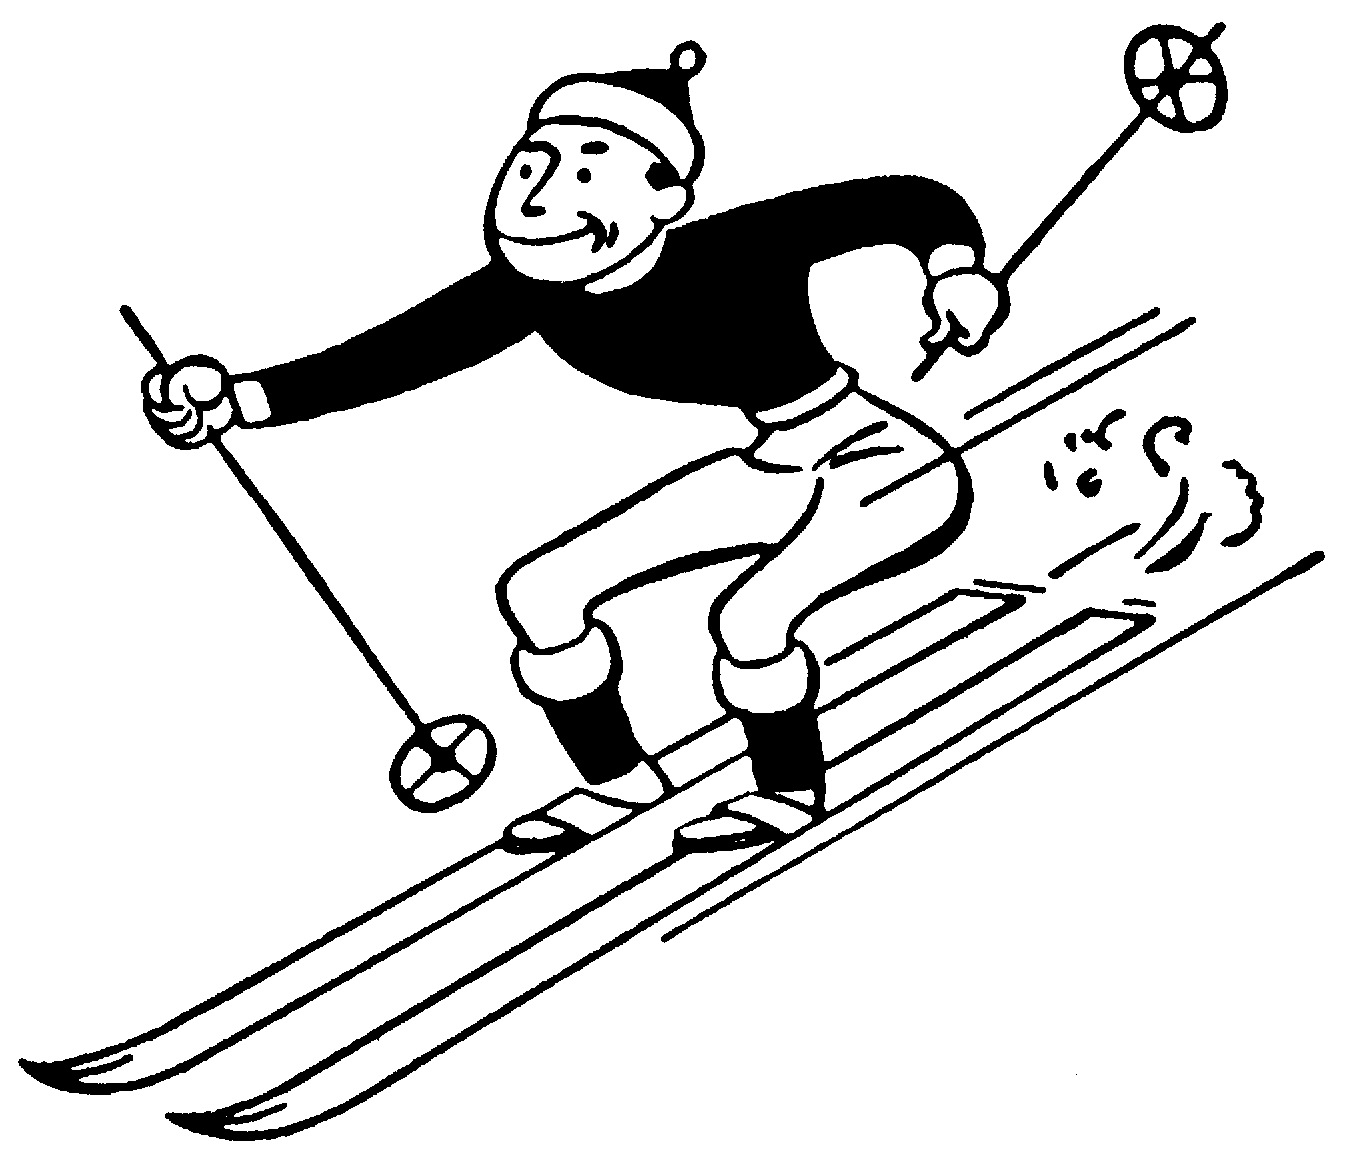 A Person Skiing Cartoon - ClipArt Best